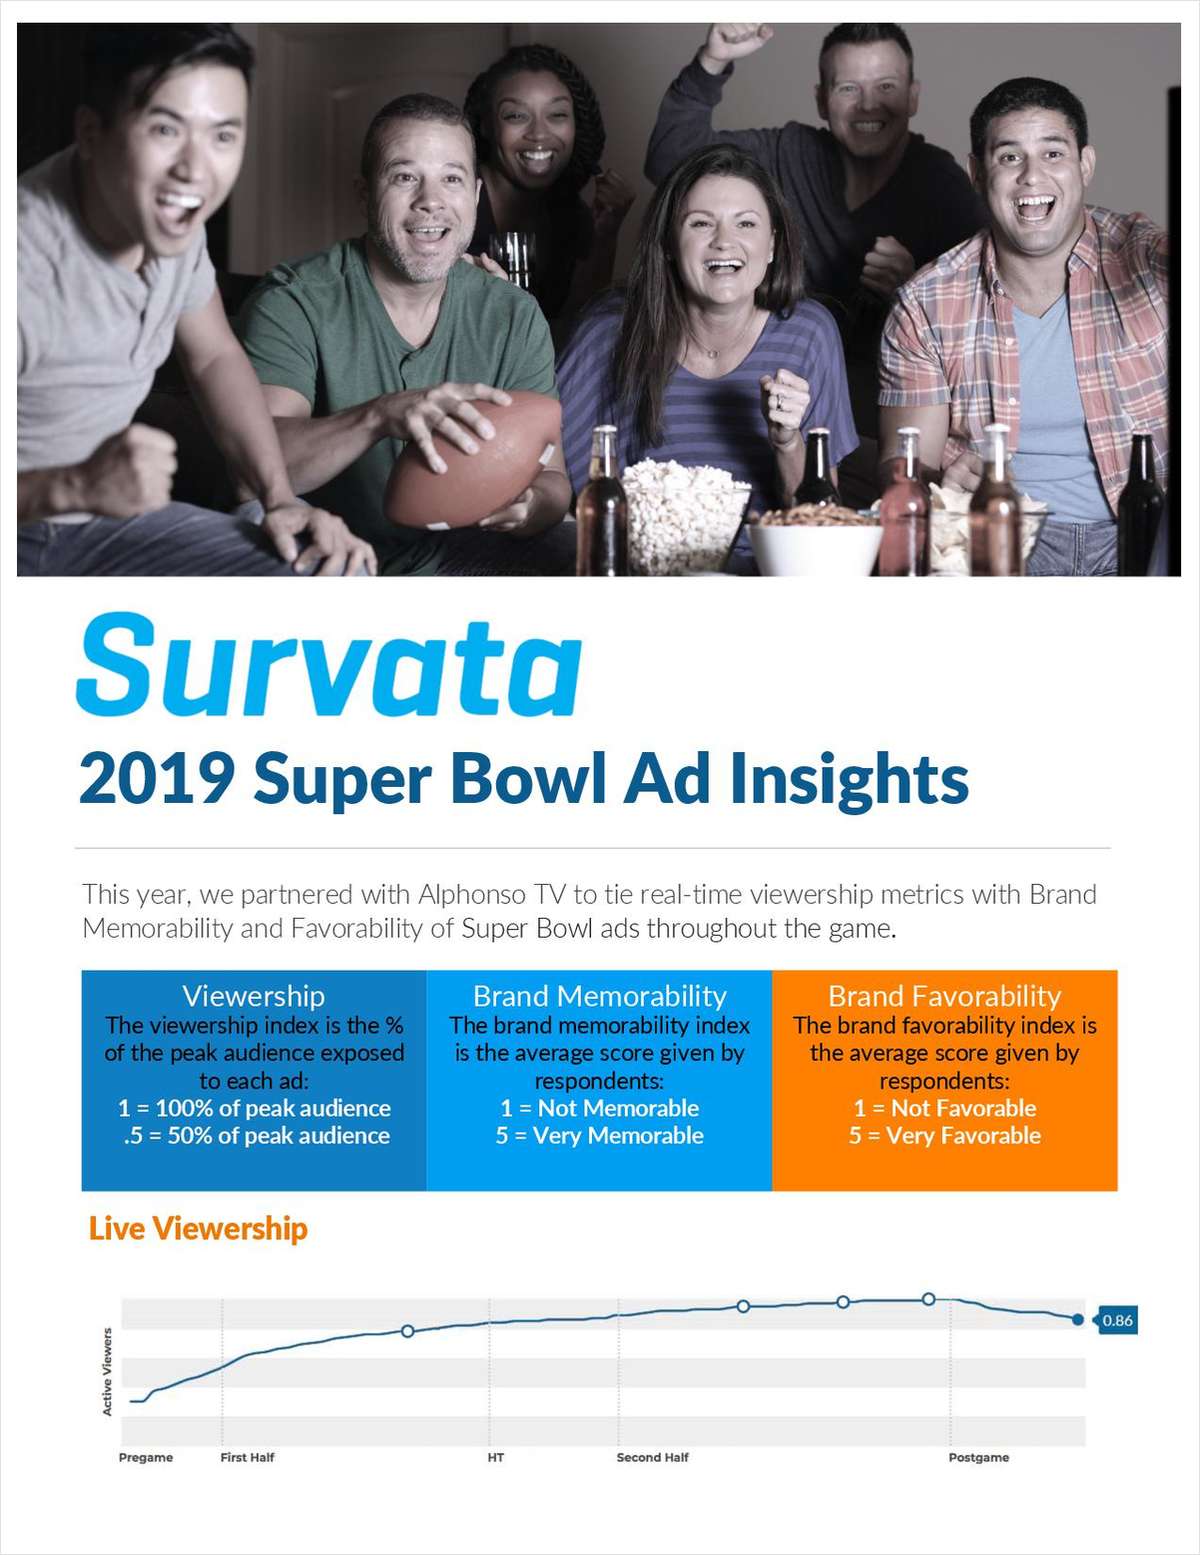 Brand Insights from Super Bowl LIII Advertisements.